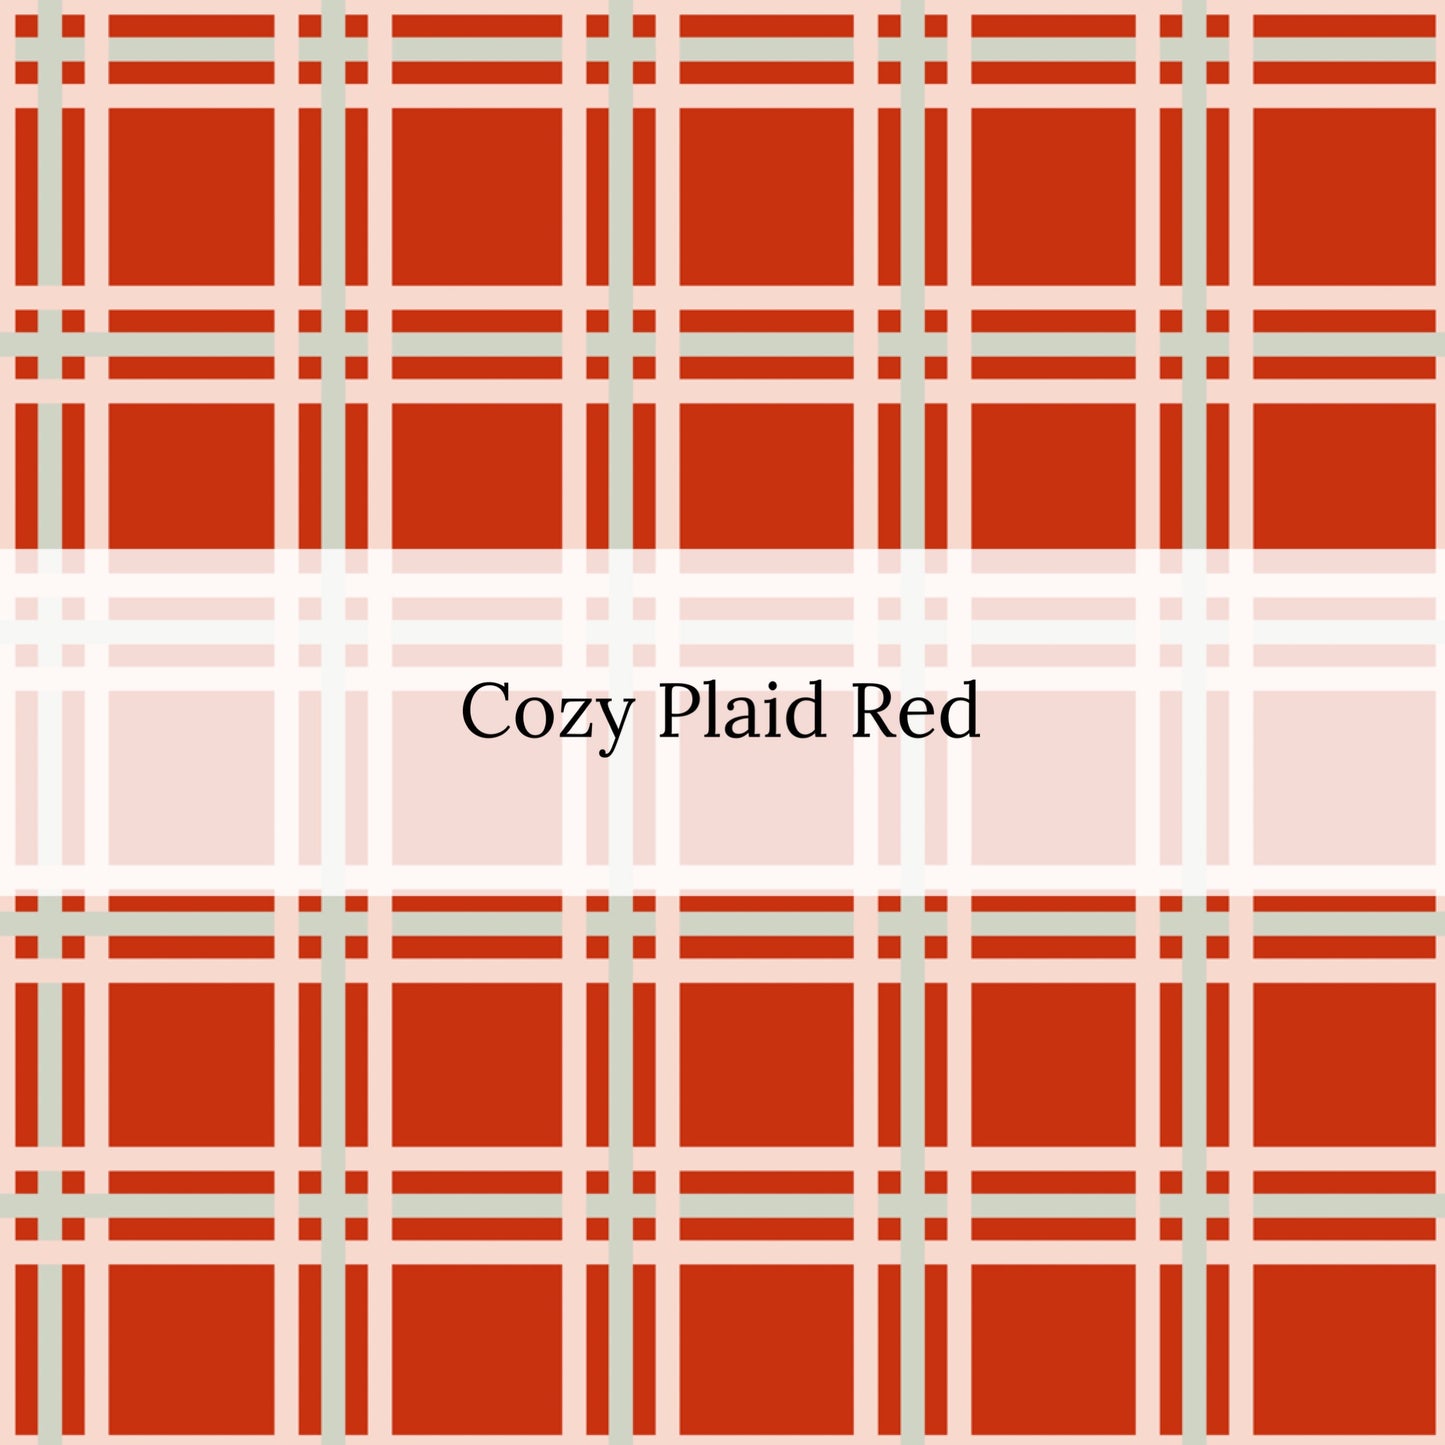 Cream, green, and red plaid illustration